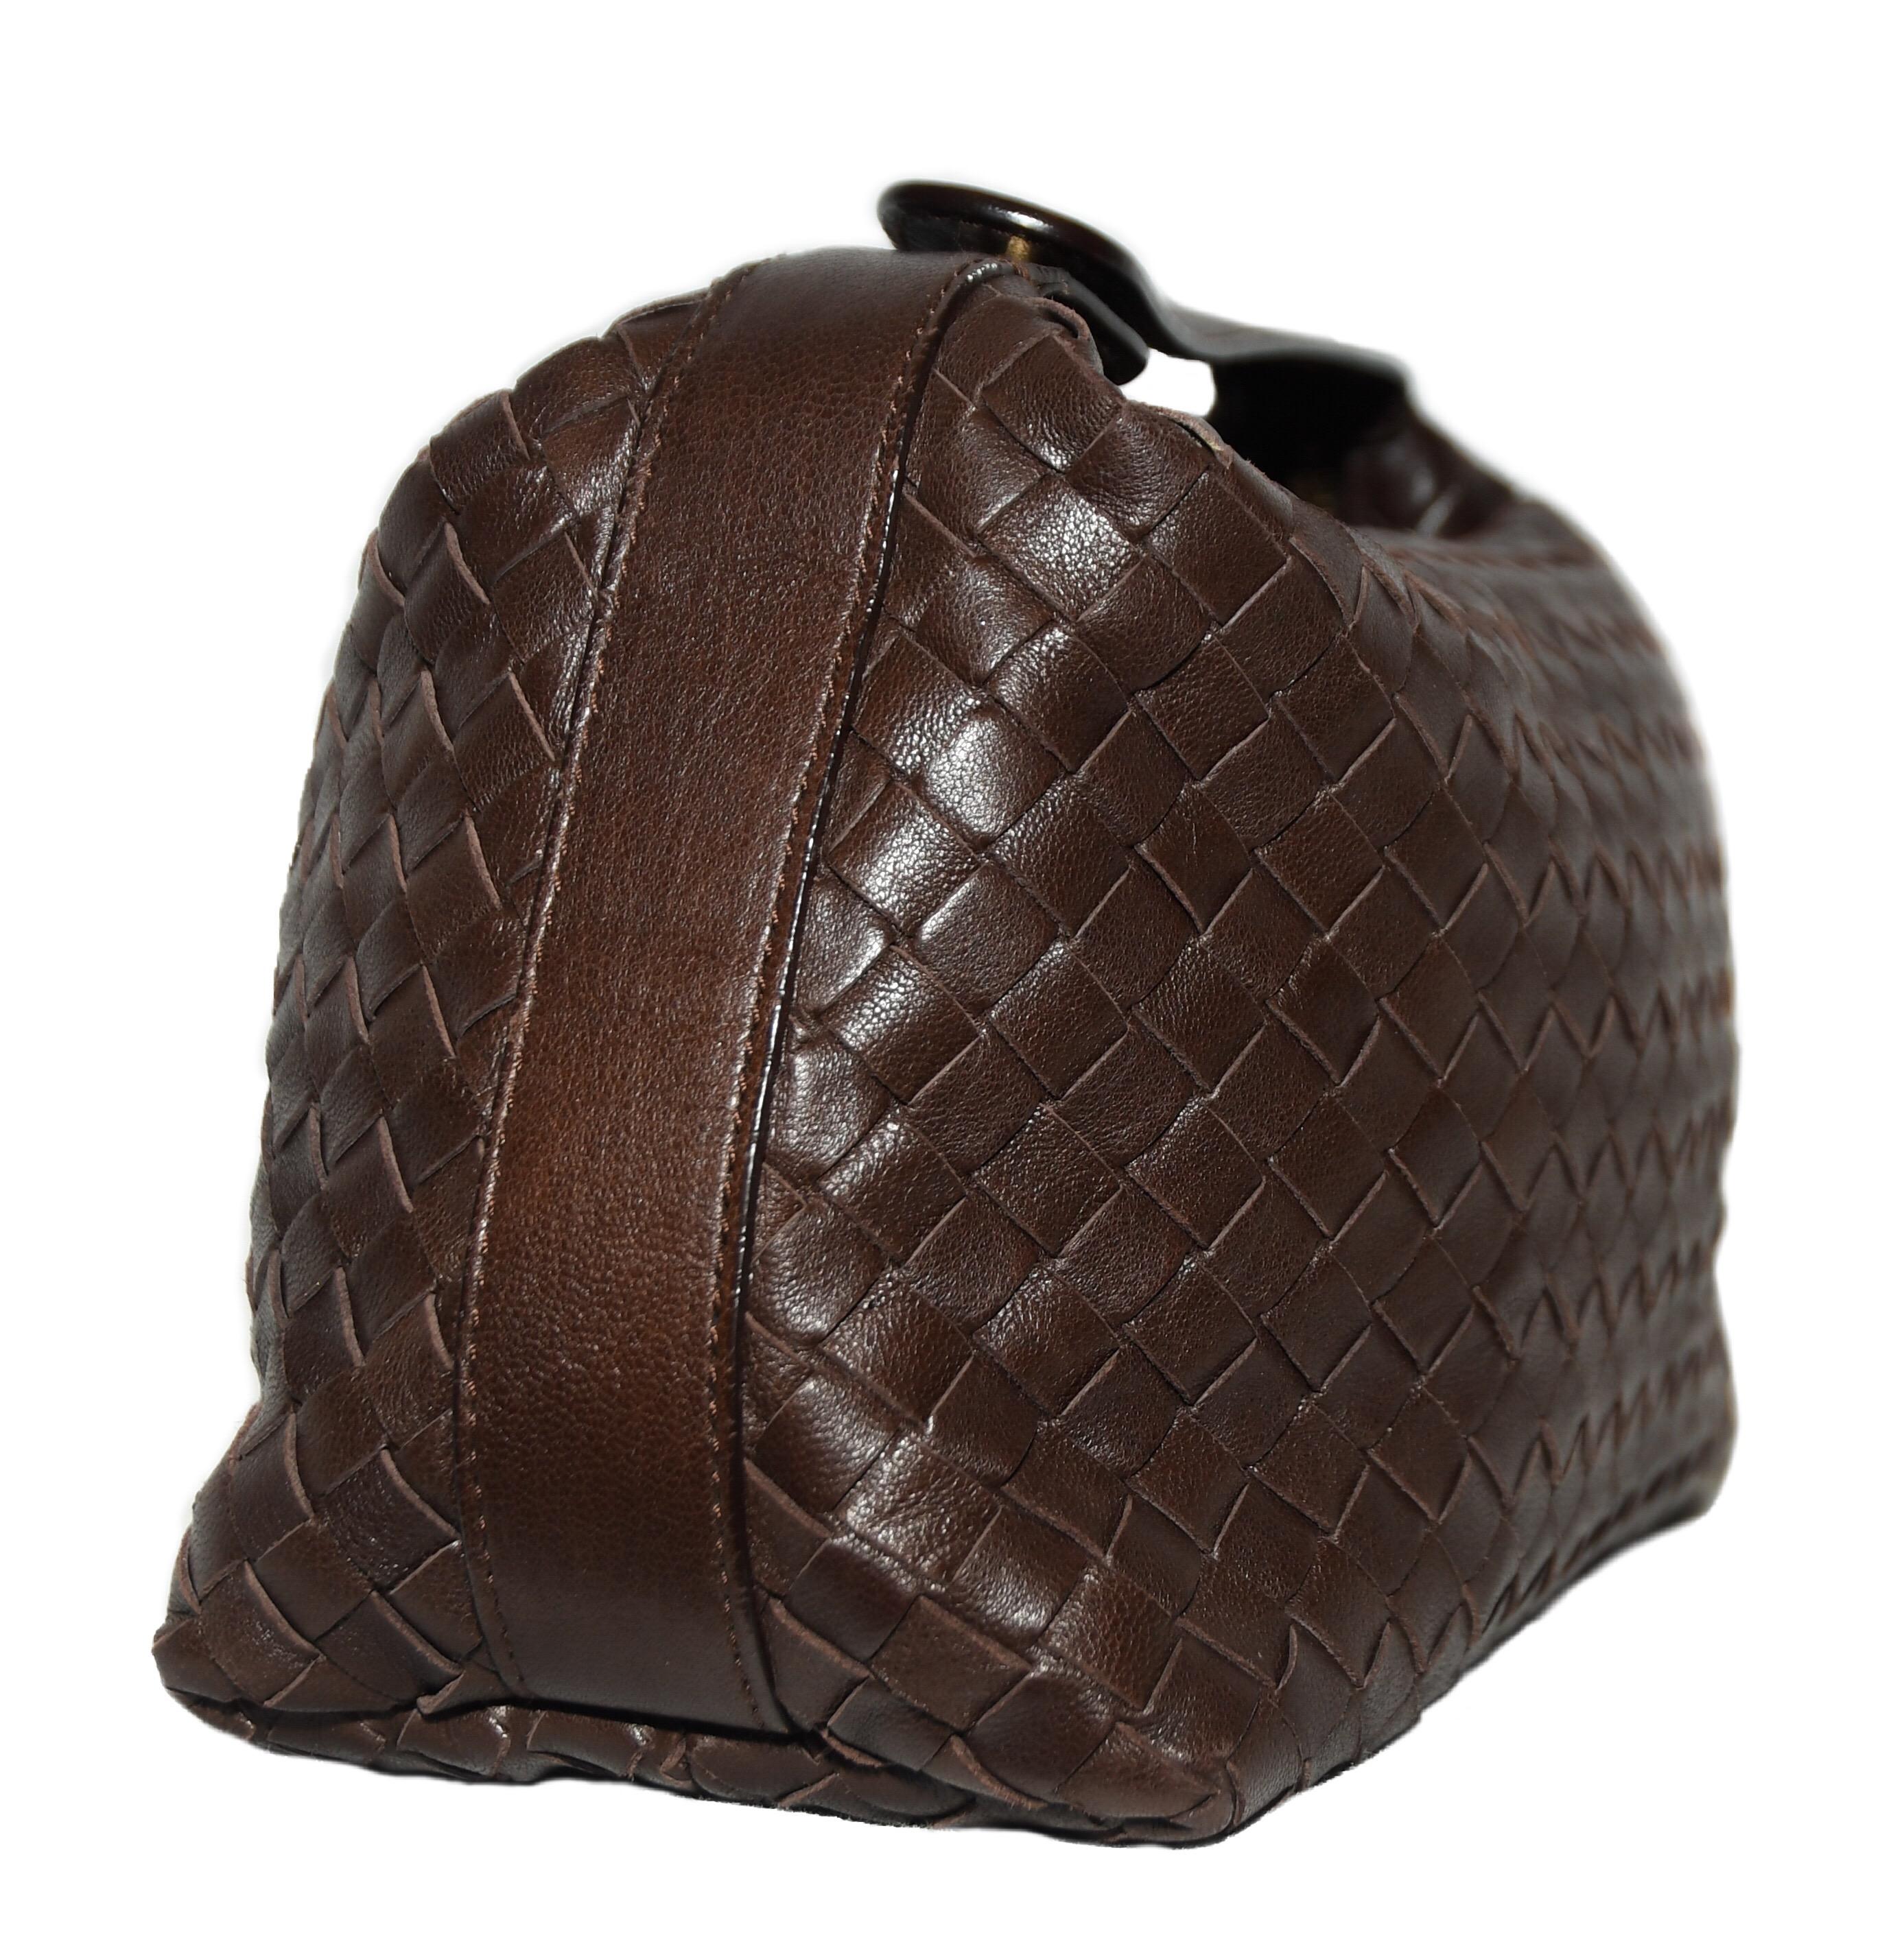 Bottega Veneta brown intercciato 2008 woven Nappa leather make up bag is lined in soft beige suede.  This bag has one central opening with gold tone zipper at top for easy access to your The handle contains one snap.  This bag is in excellent